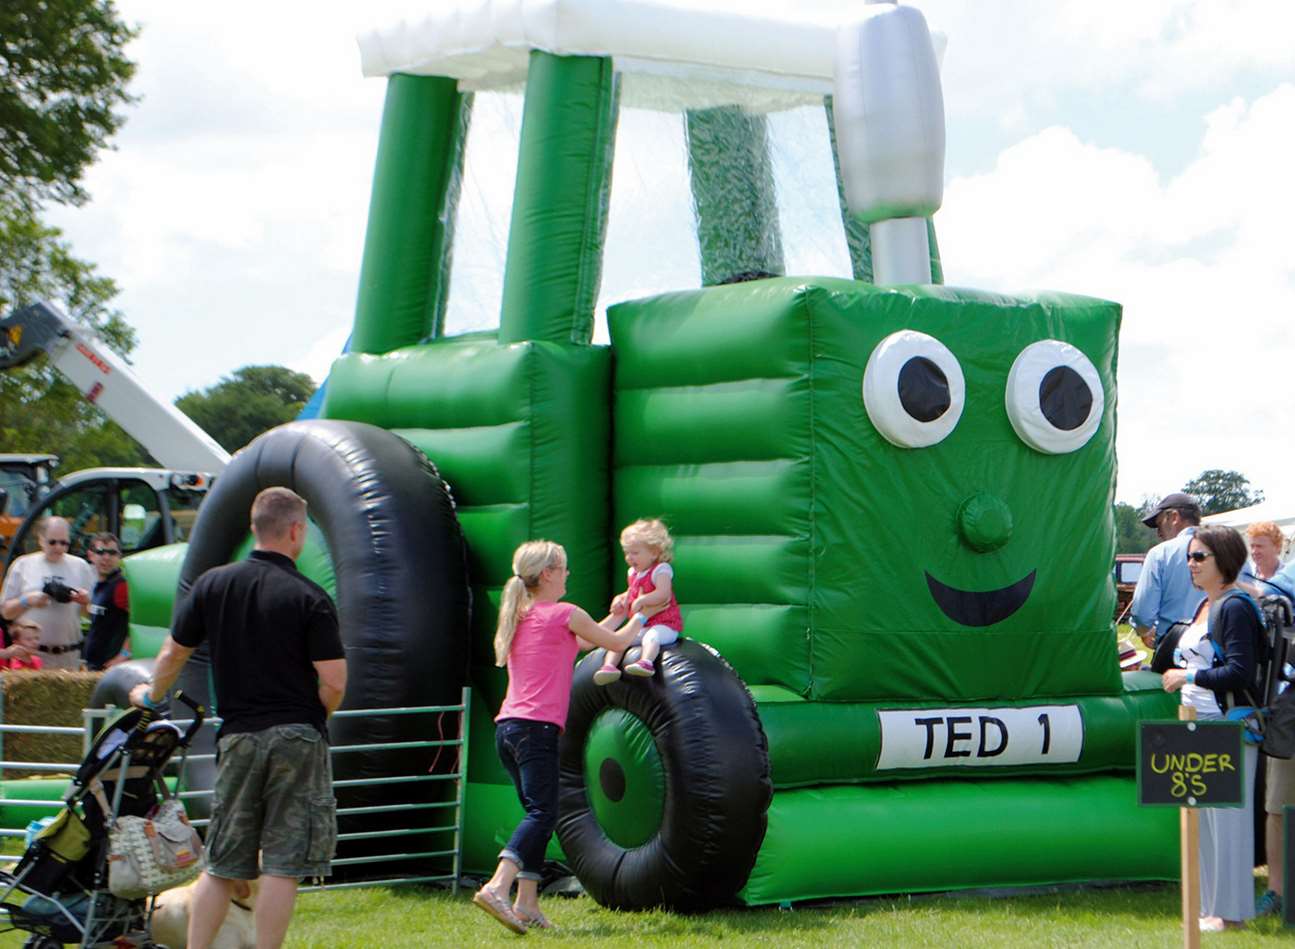 Tractor Ted will be delighting younger visitors to the Kent County Show